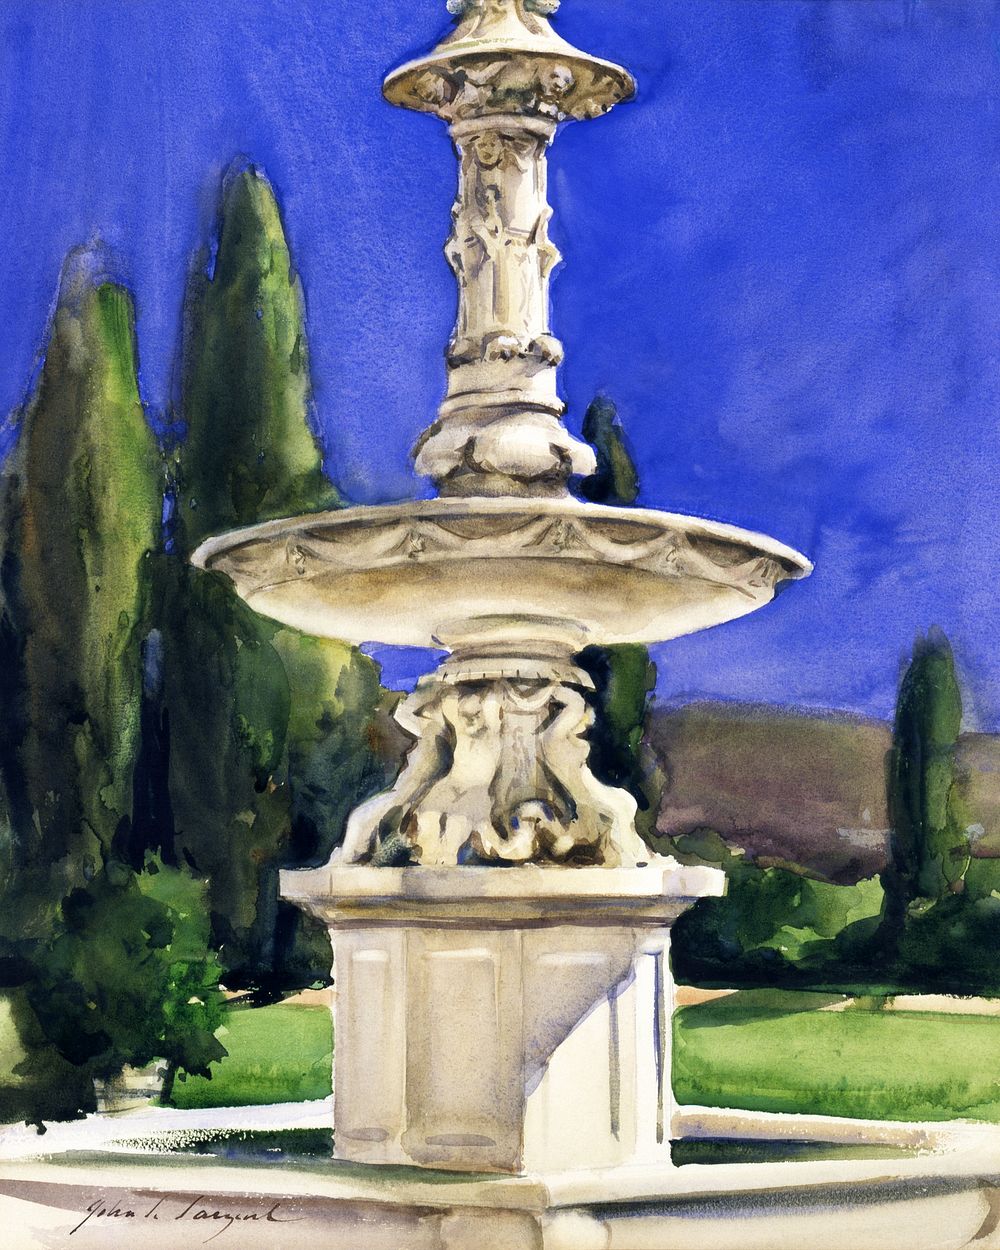 Marble Fountain in Italy (1907) watercolor art by John Singer Sargent. Original public domain image from The Smithsonian…